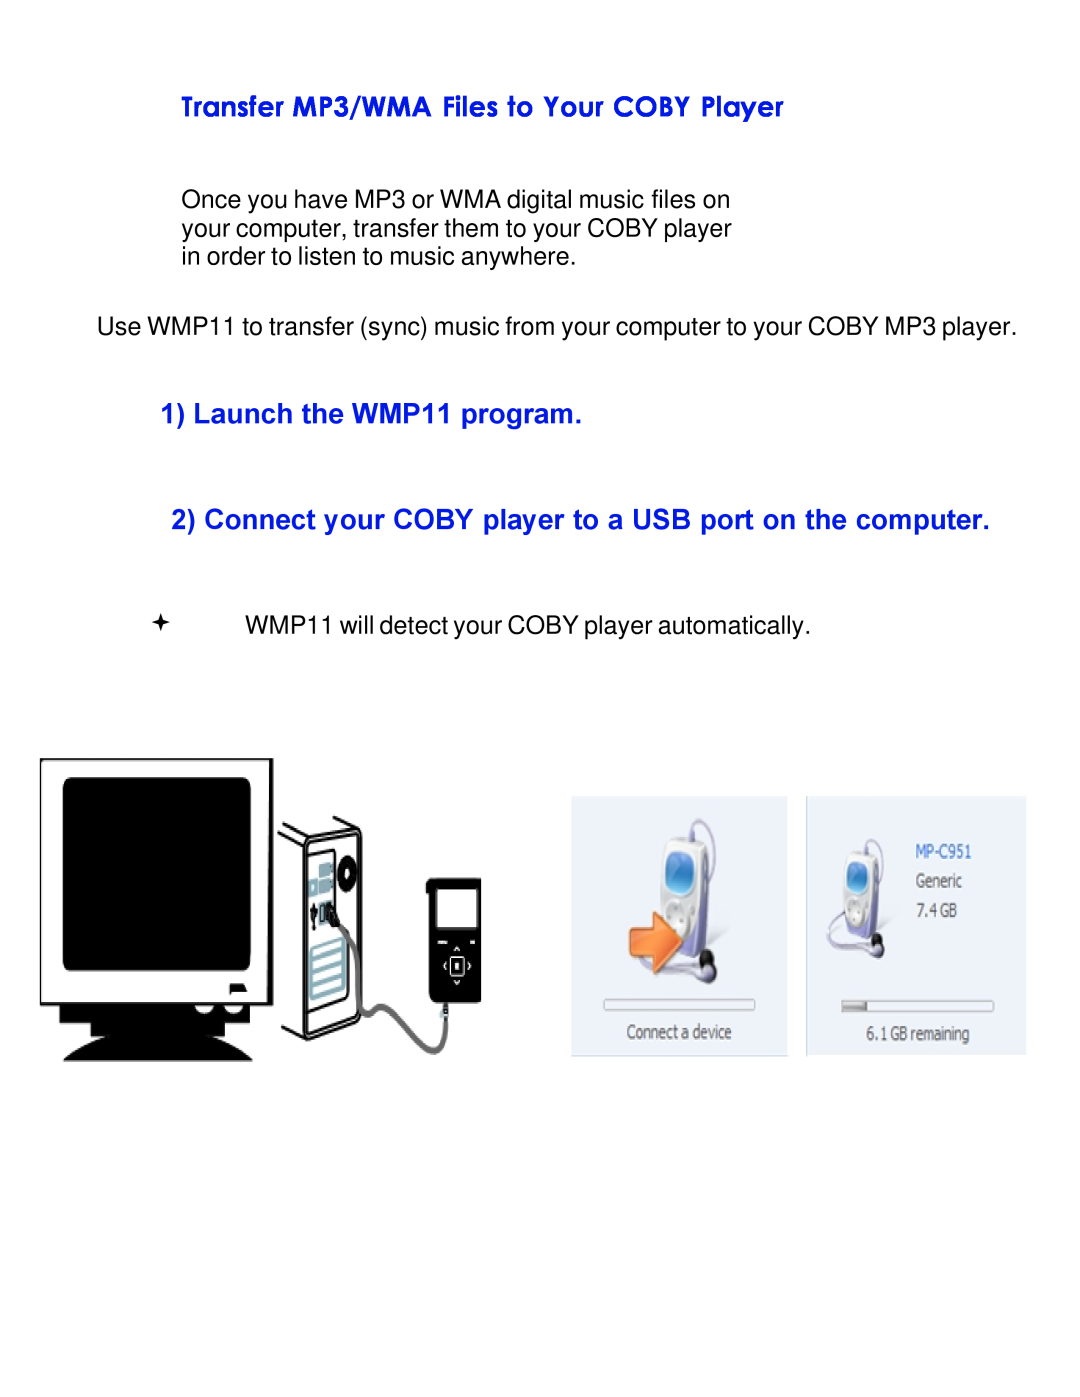 COBY electronic MPC7055 setup guide Transfer MP3/WMA Files to Your COBY Player, 1Launch the WMP11 program 